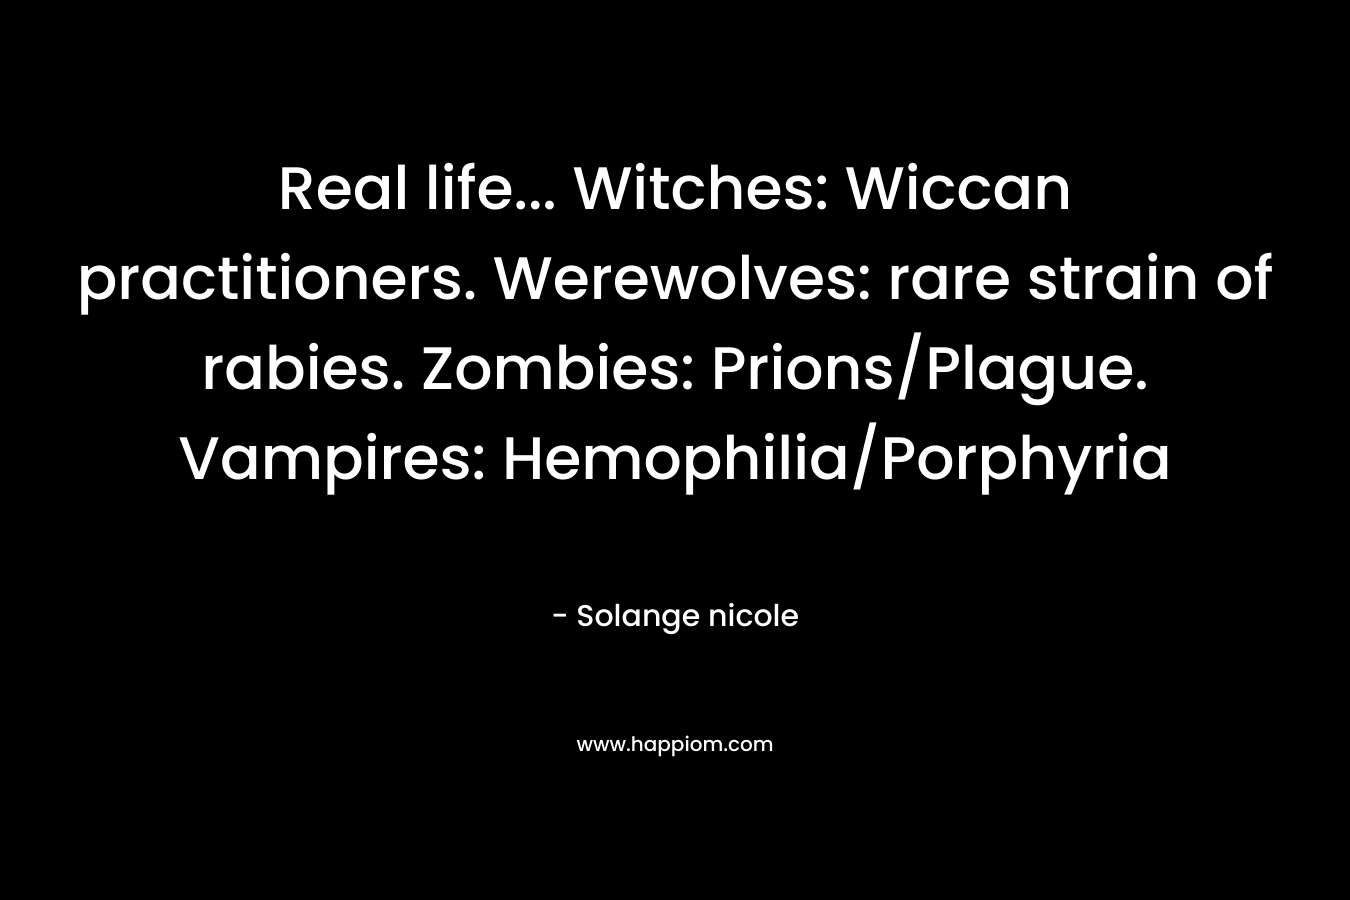 Real life… Witches: Wiccan practitioners. Werewolves: rare strain of rabies. Zombies: Prions/Plague. Vampires: Hemophilia/Porphyria – Solange nicole